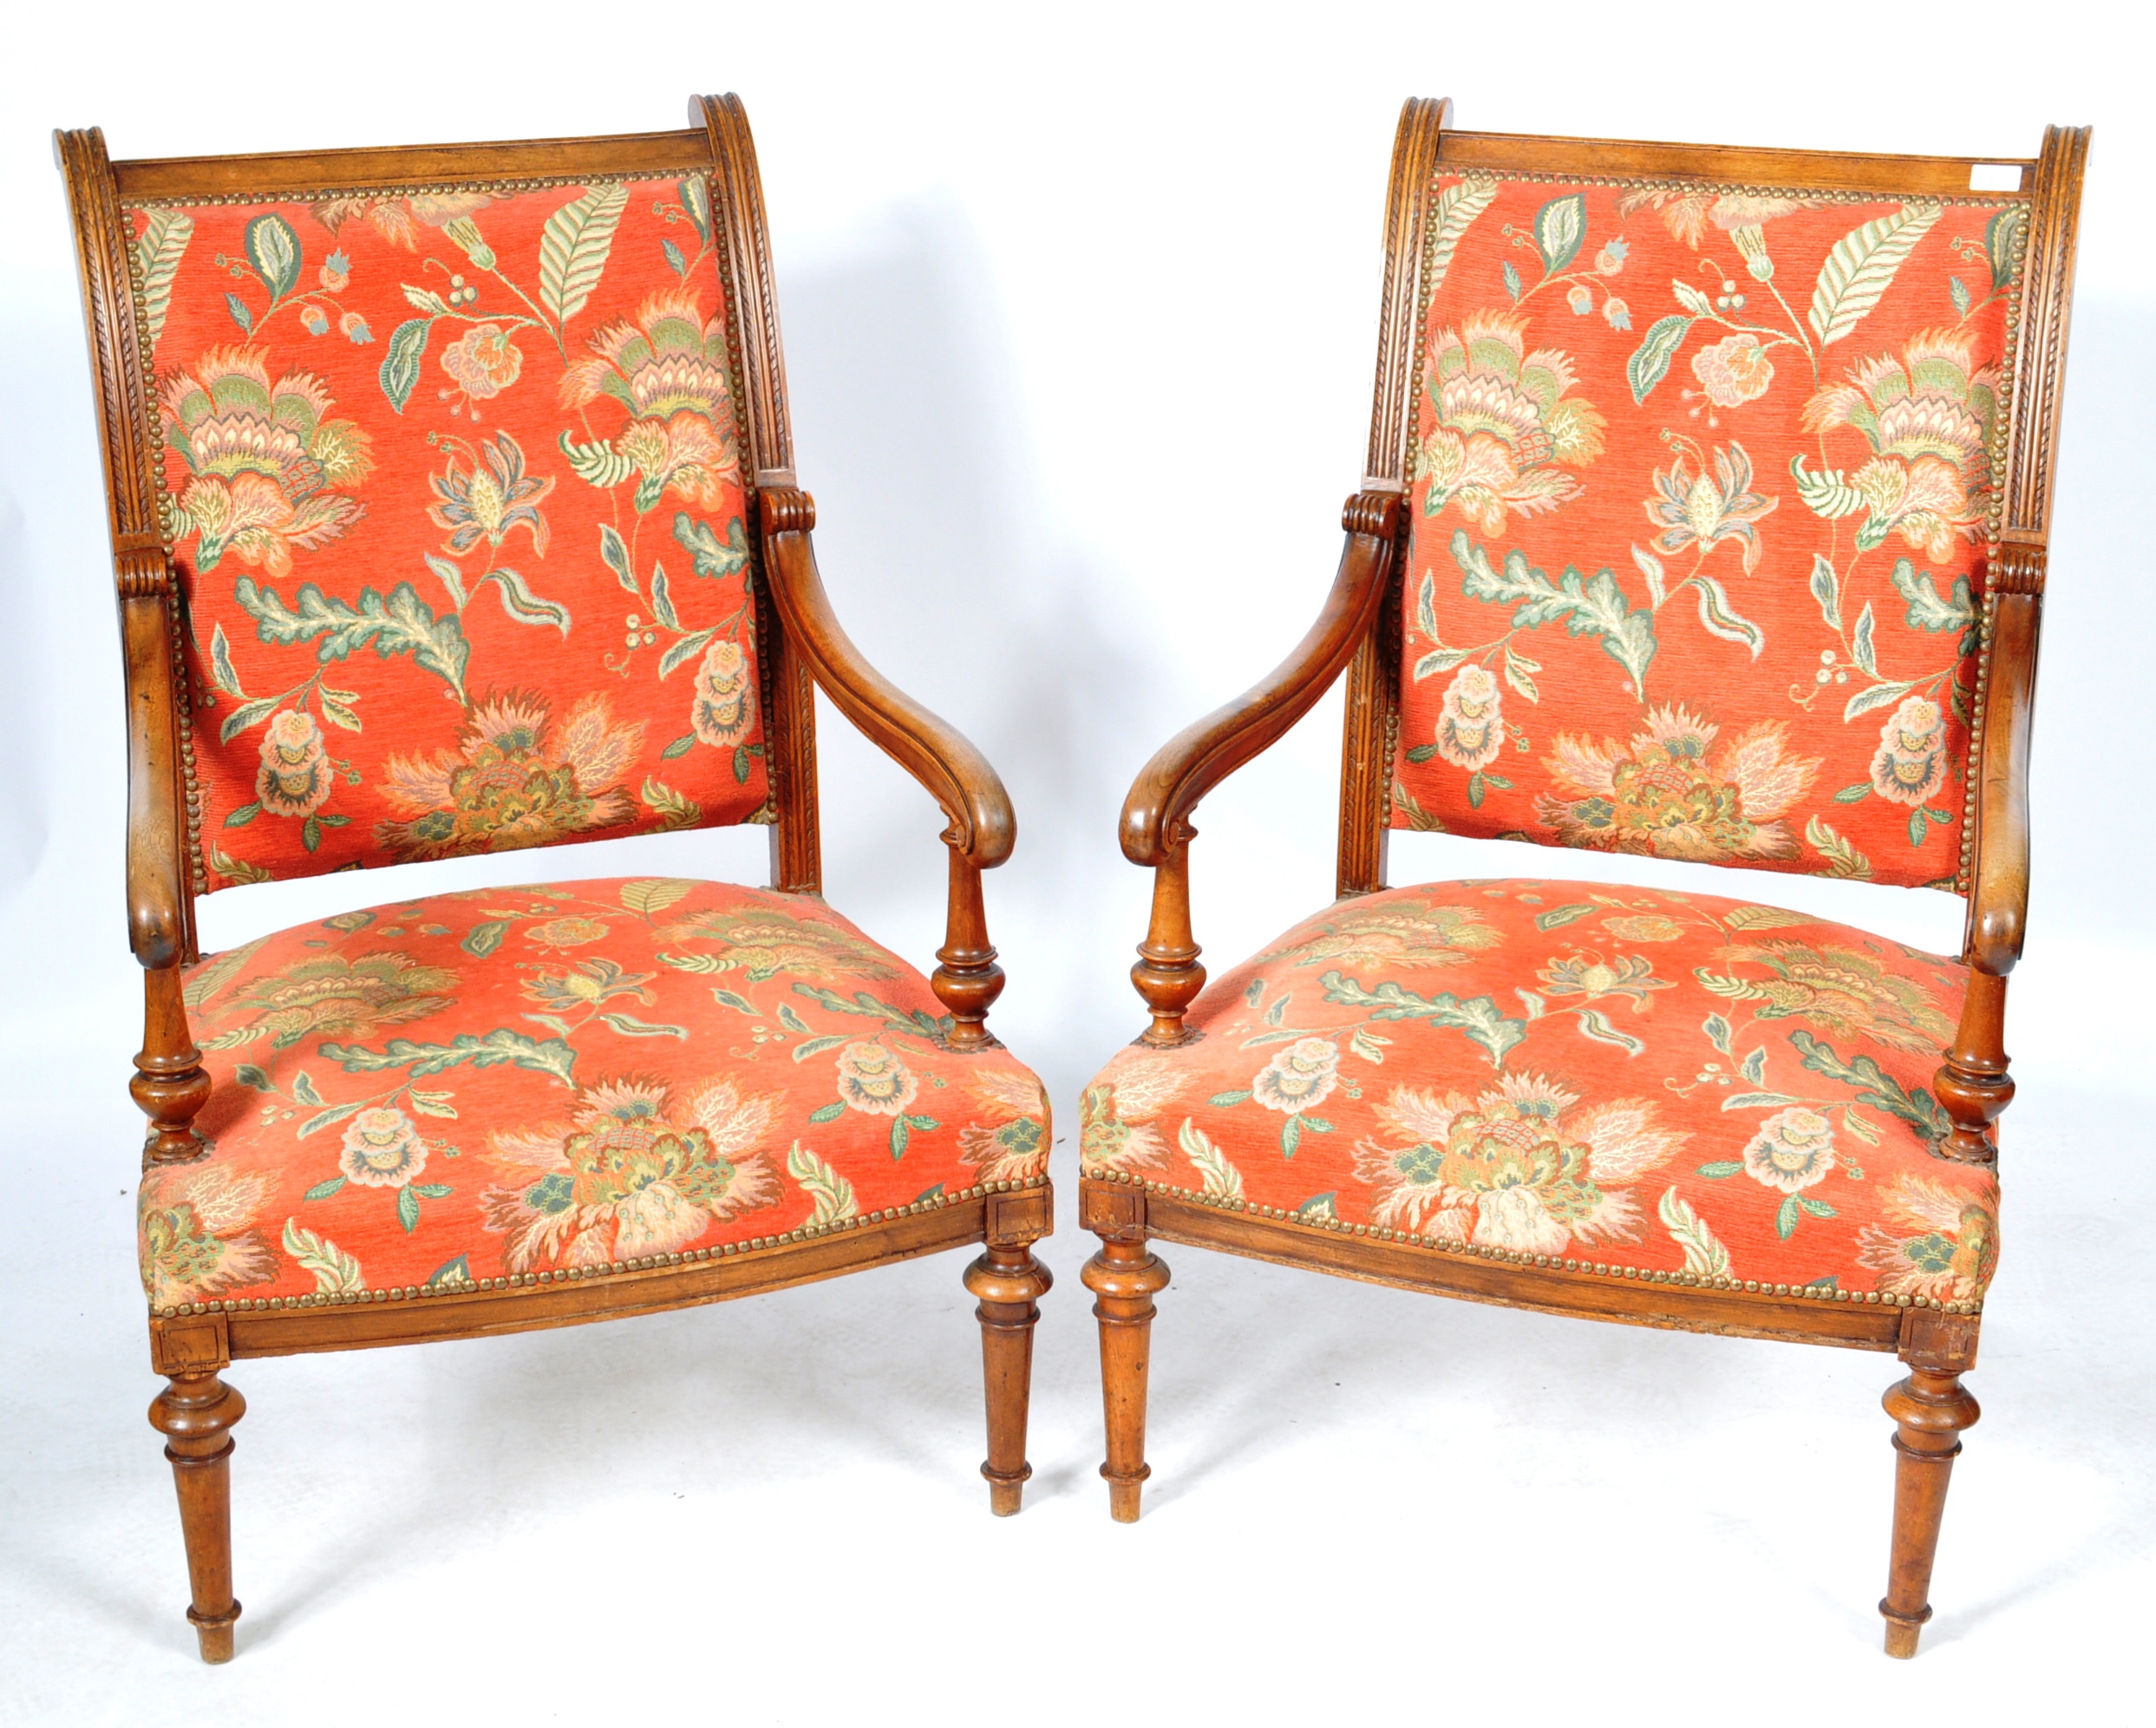 PAIR OF 19TH CARVED WALNUT FRAMED ARMCHAIRS - Image 2 of 8